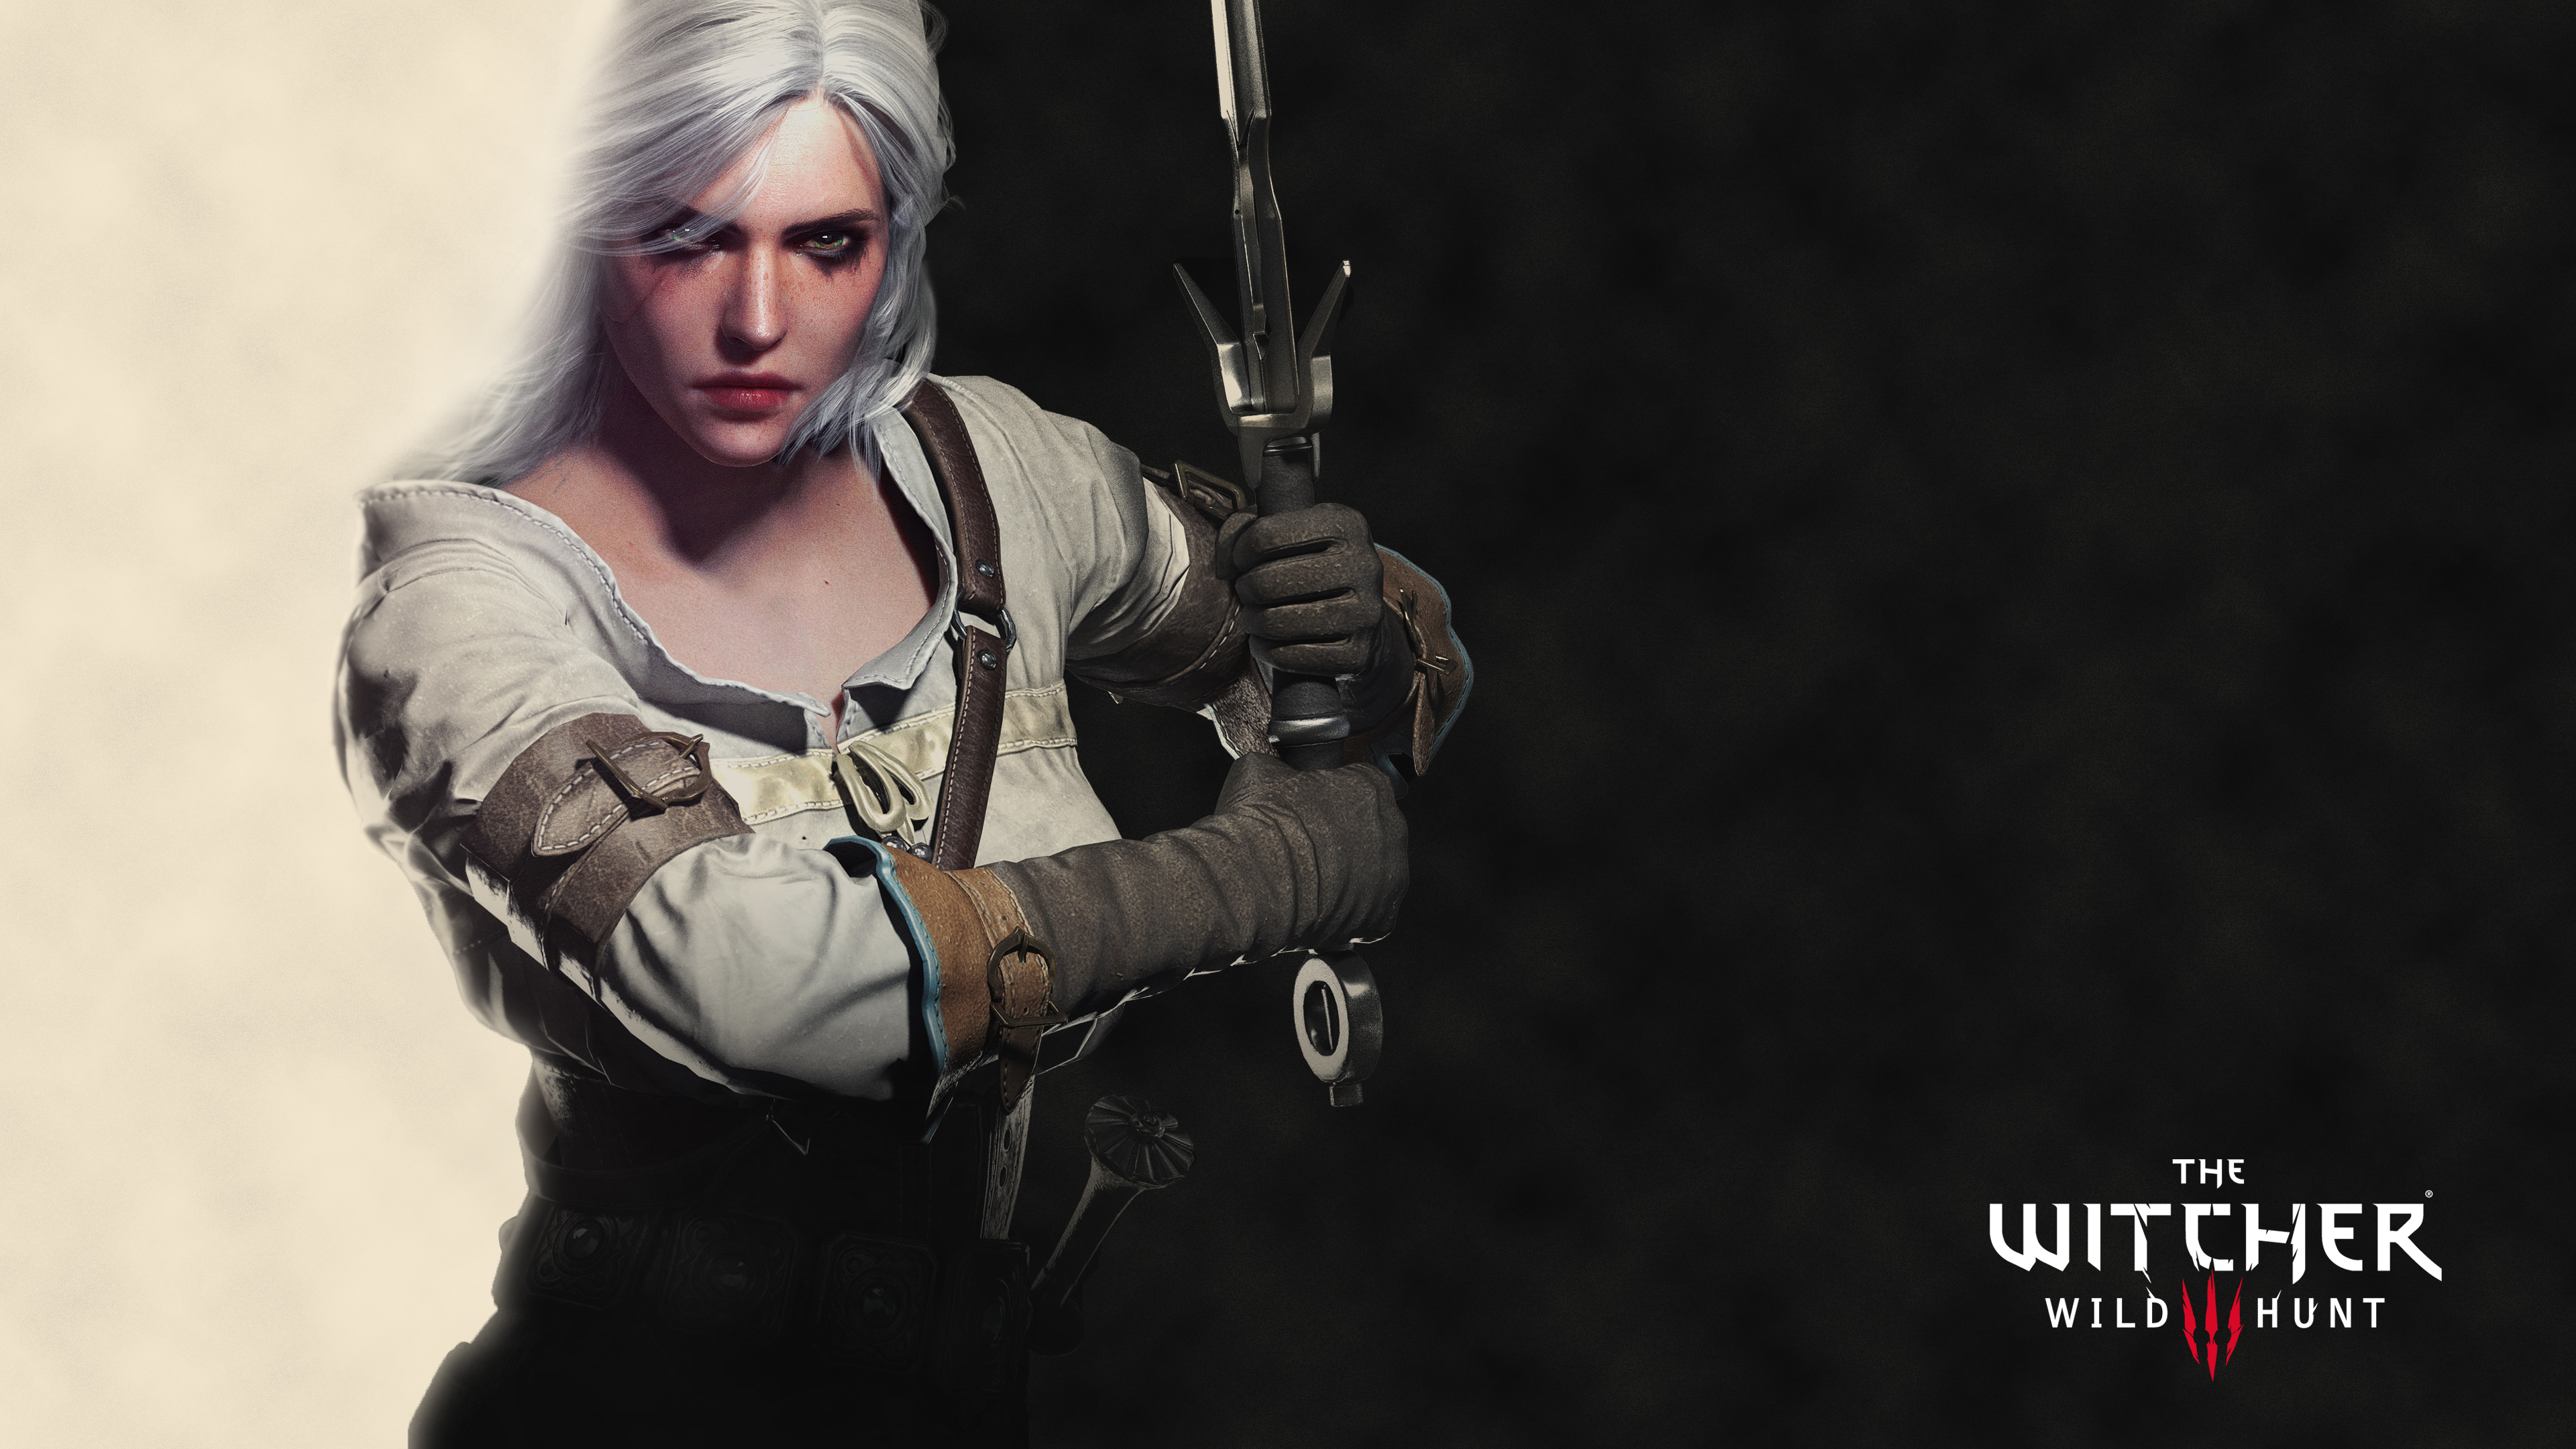 General 3840x2160 Cirilla Fiona Elen Riannon The Witcher The Witcher 3: Wild Hunt video game characters video game girls video games blonde women artwork